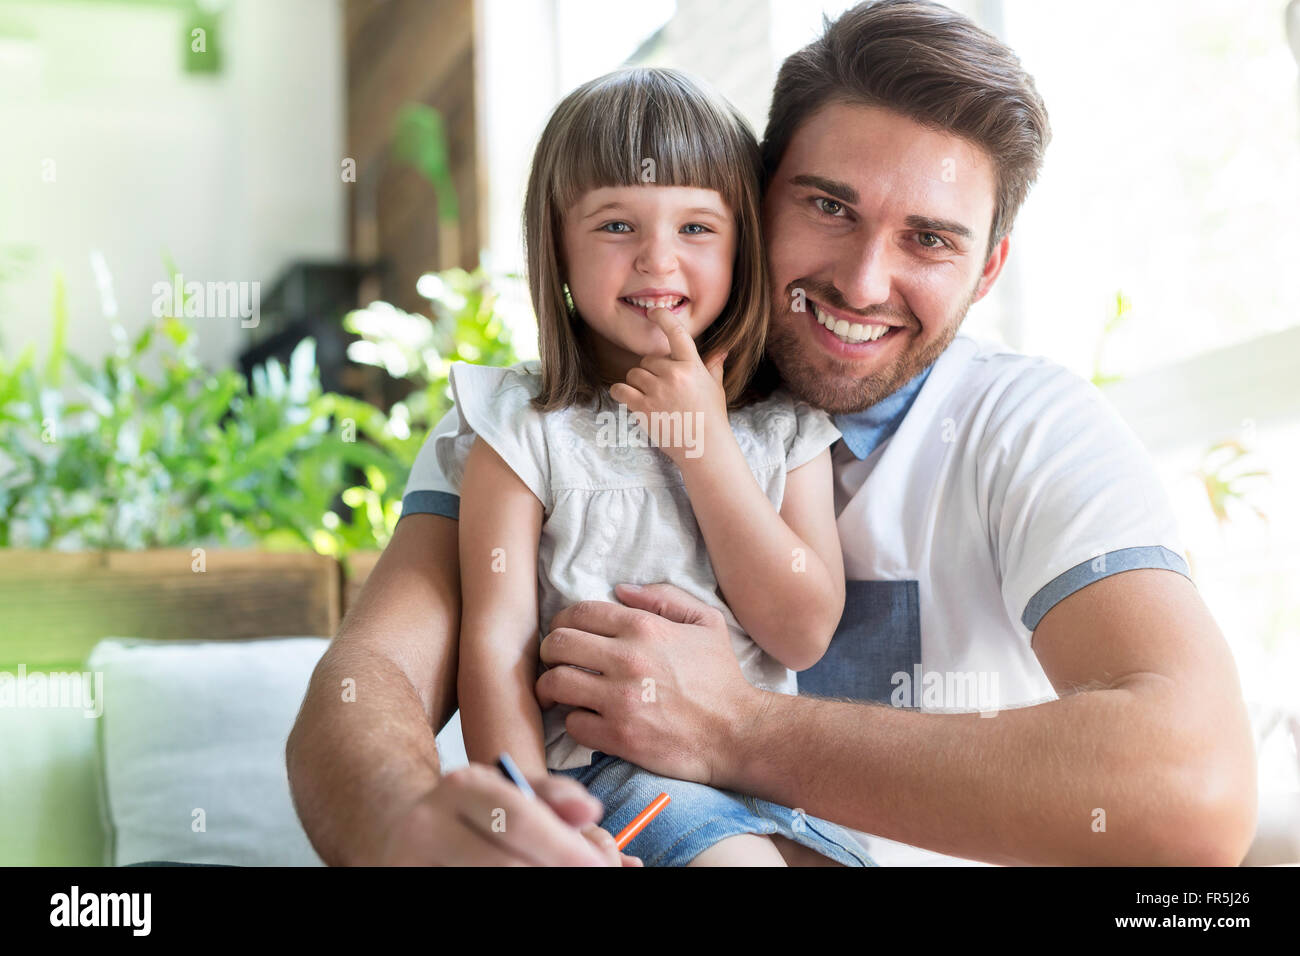 Portrait smiling father and daughter Stock Photo